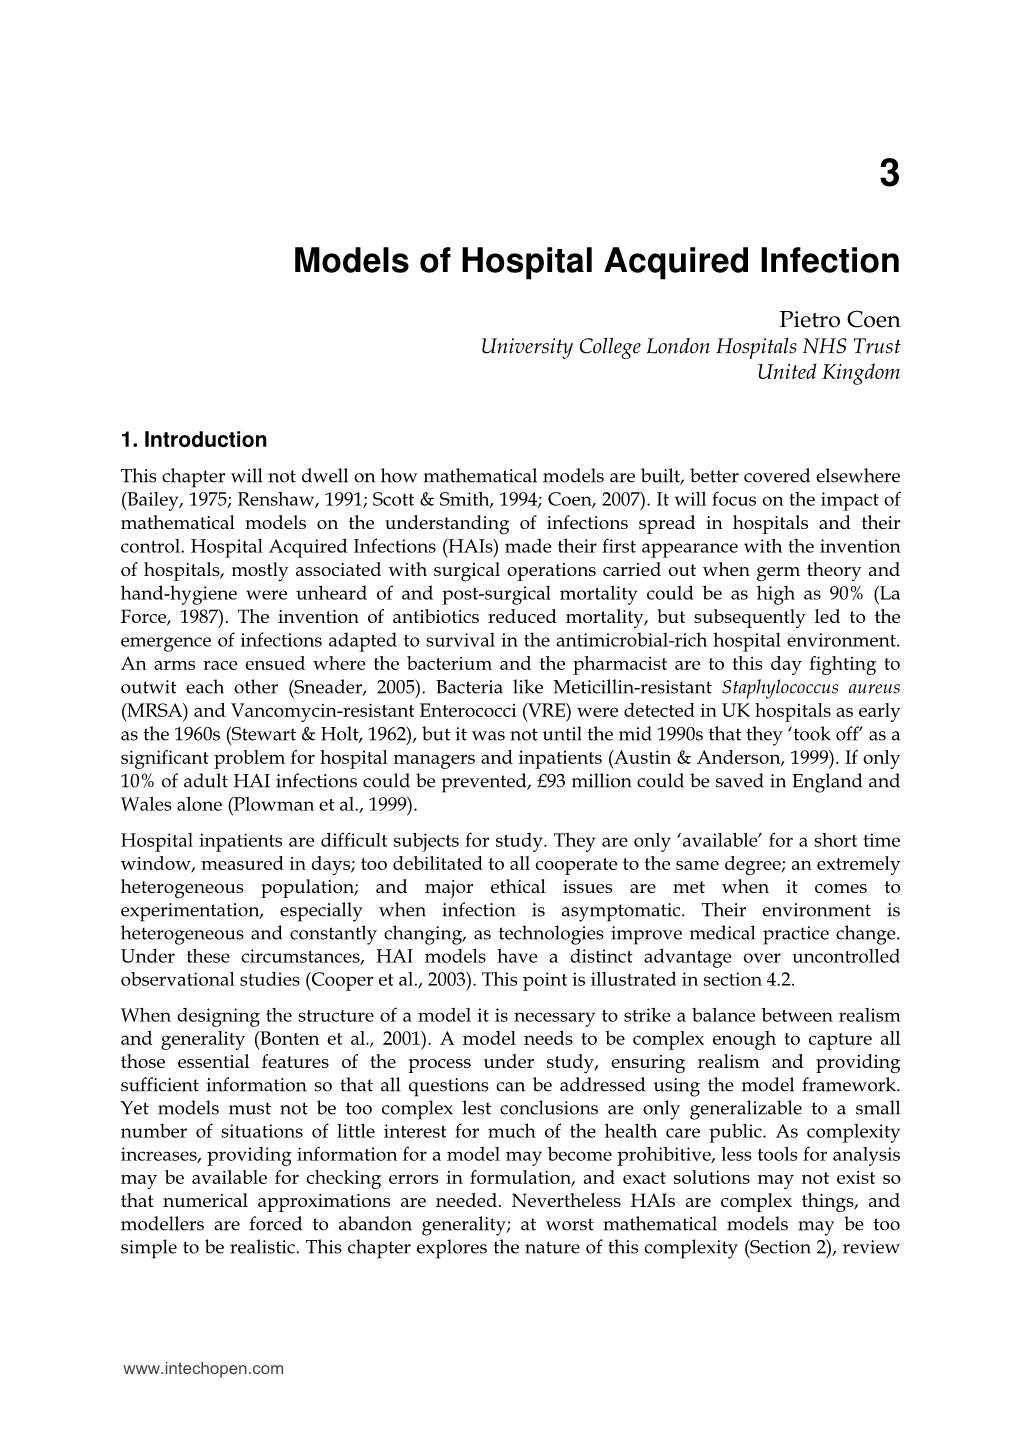 Models of Hospital Acquired Infection